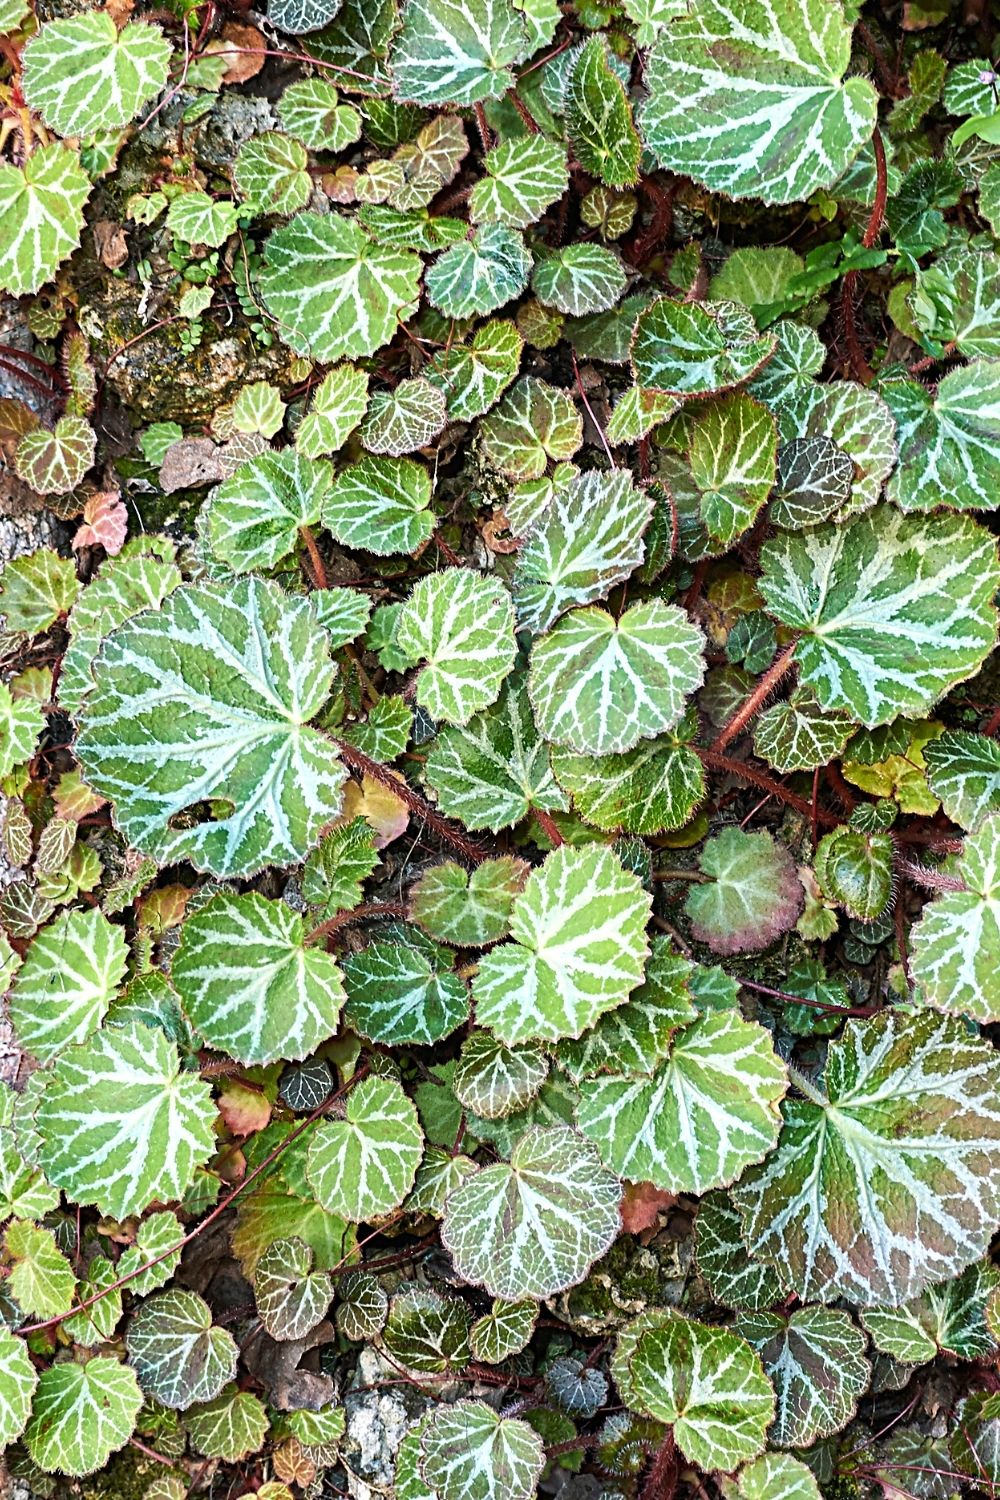 The attractive and rounded leaves of the Strawberry begonia is a great addition to a terrarium